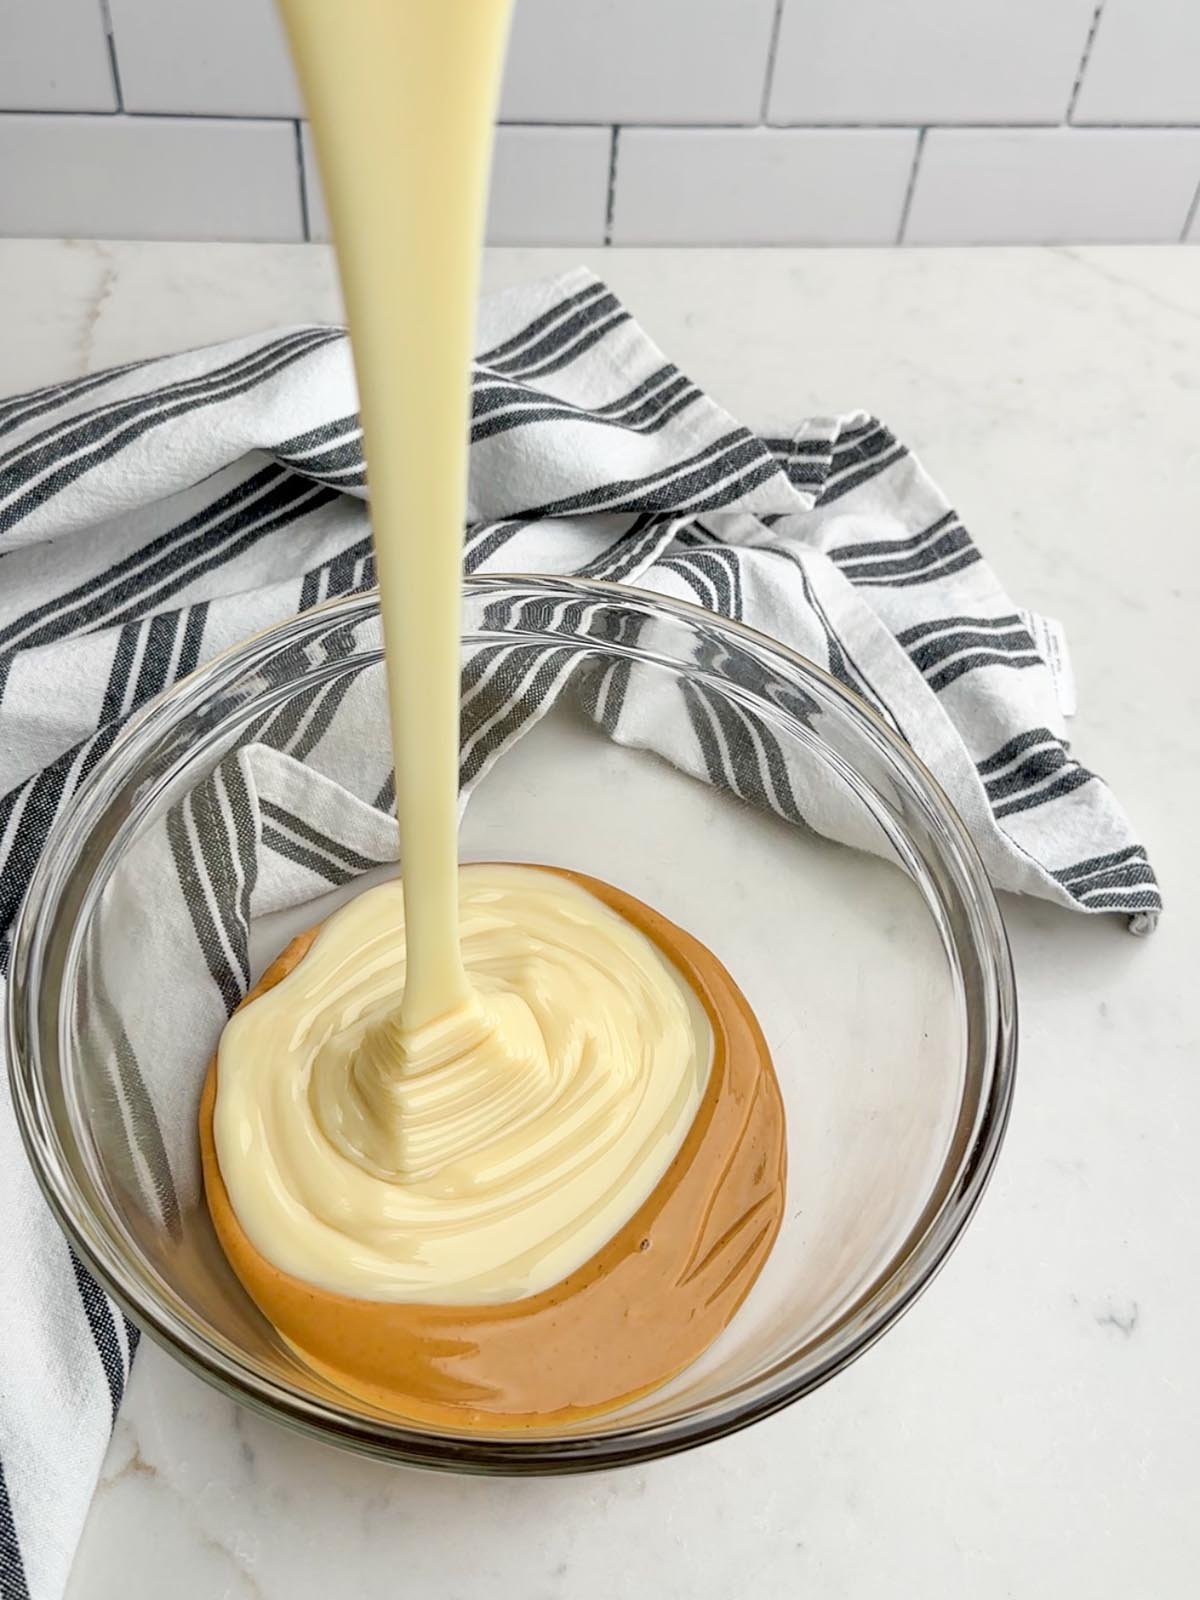 Condensed milk pouring into a bowl with melted peanut butter.